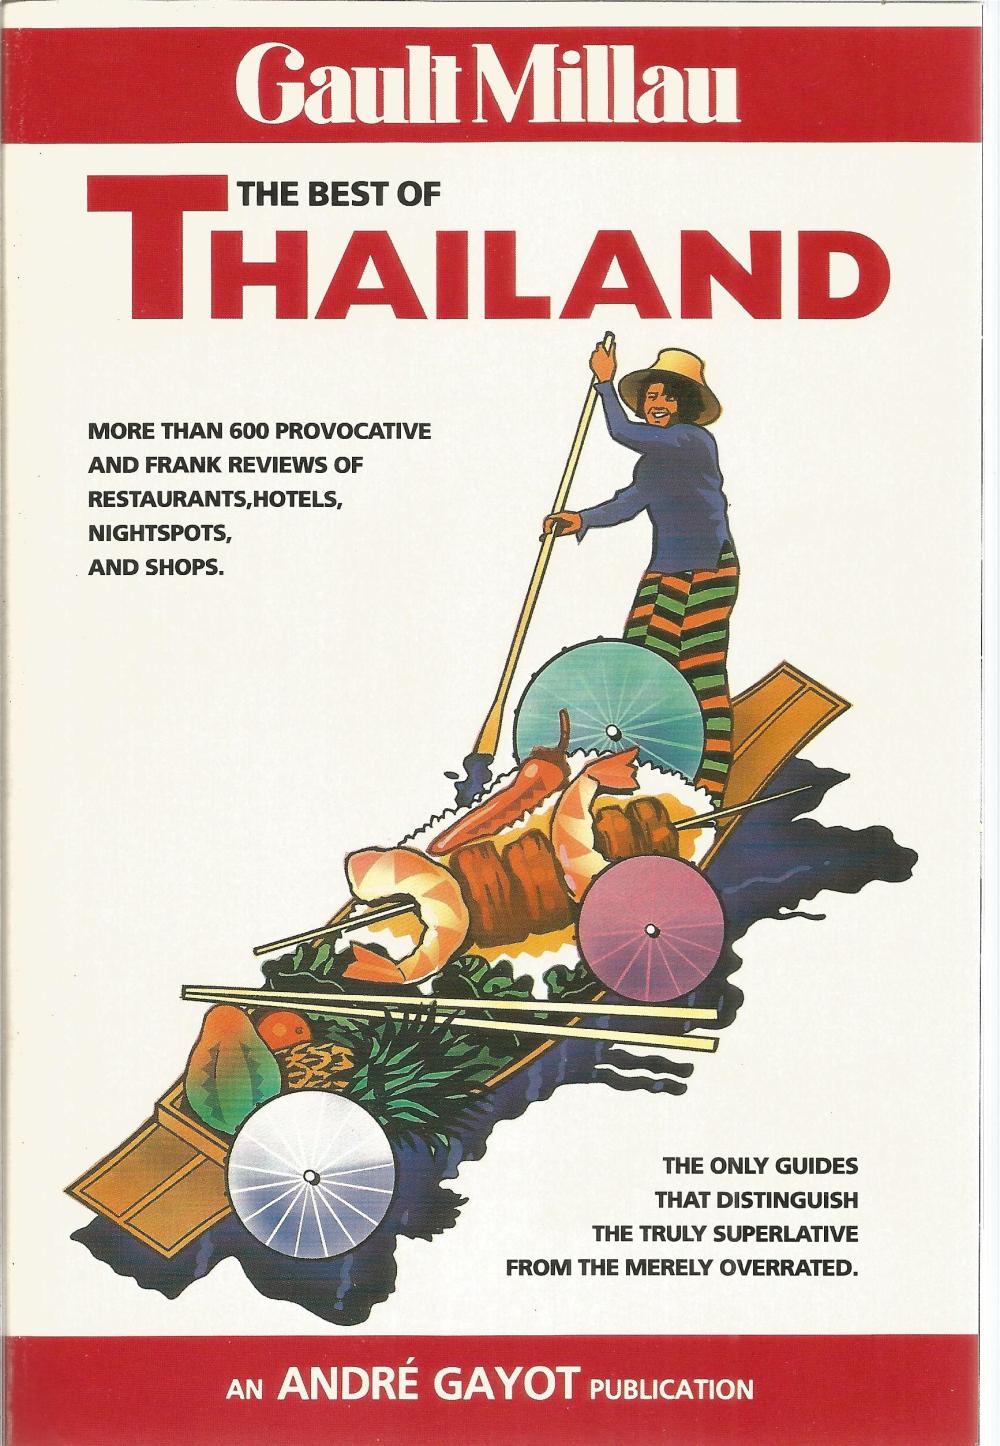 The Best of Thailand travel guide an Andre Gayot Publication. Unsigned boxed paperback book